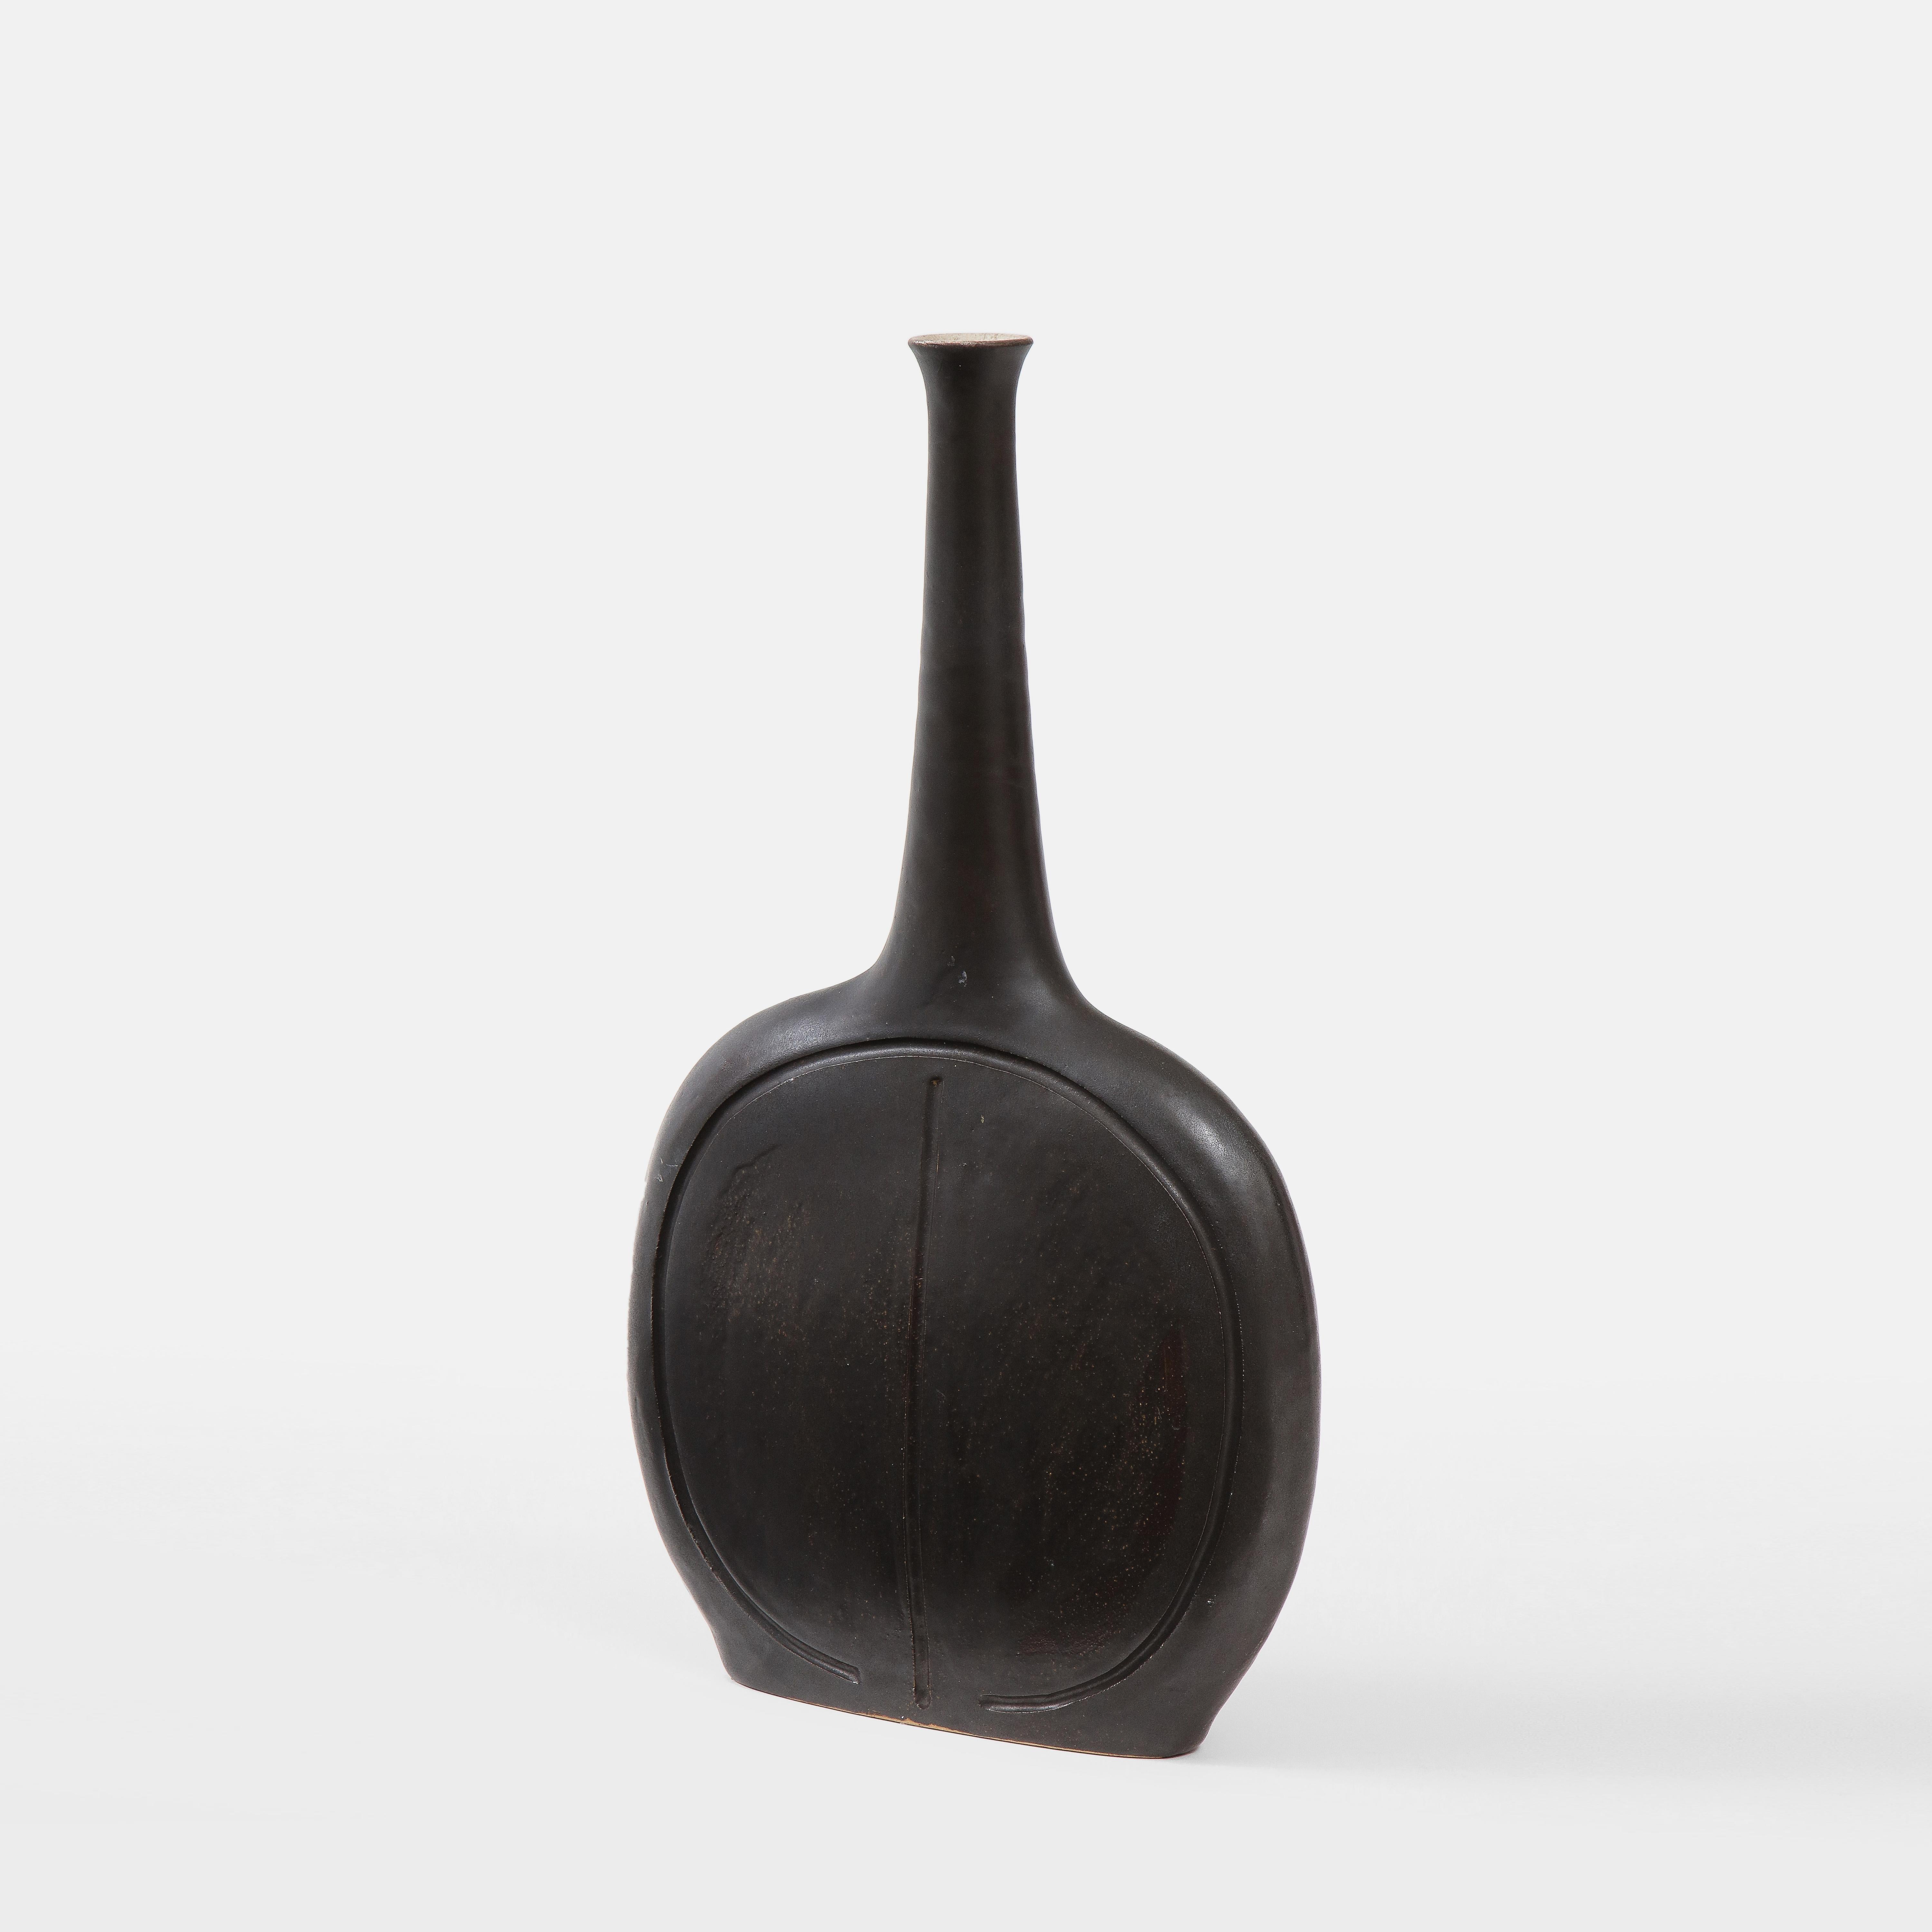 Bruno Gambone light black glazed ceramic bottle or vase with a flattened circular body and elongated tapering neck, Italy 1970s. The body is incised with an abstract engraved decoration. Signed on bottom 